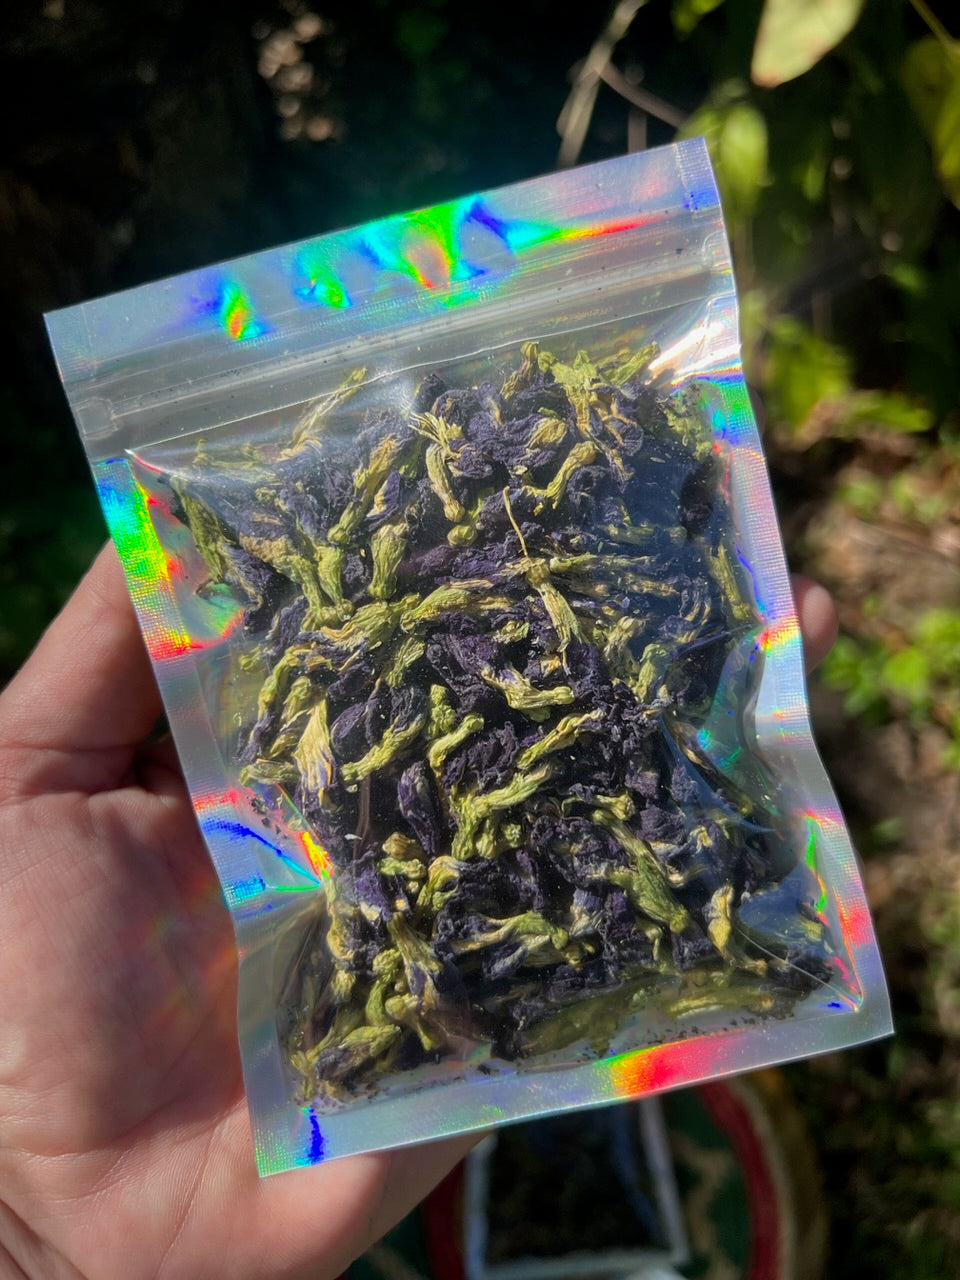 Butterfly Pea Herb - Dried Whole Flowers